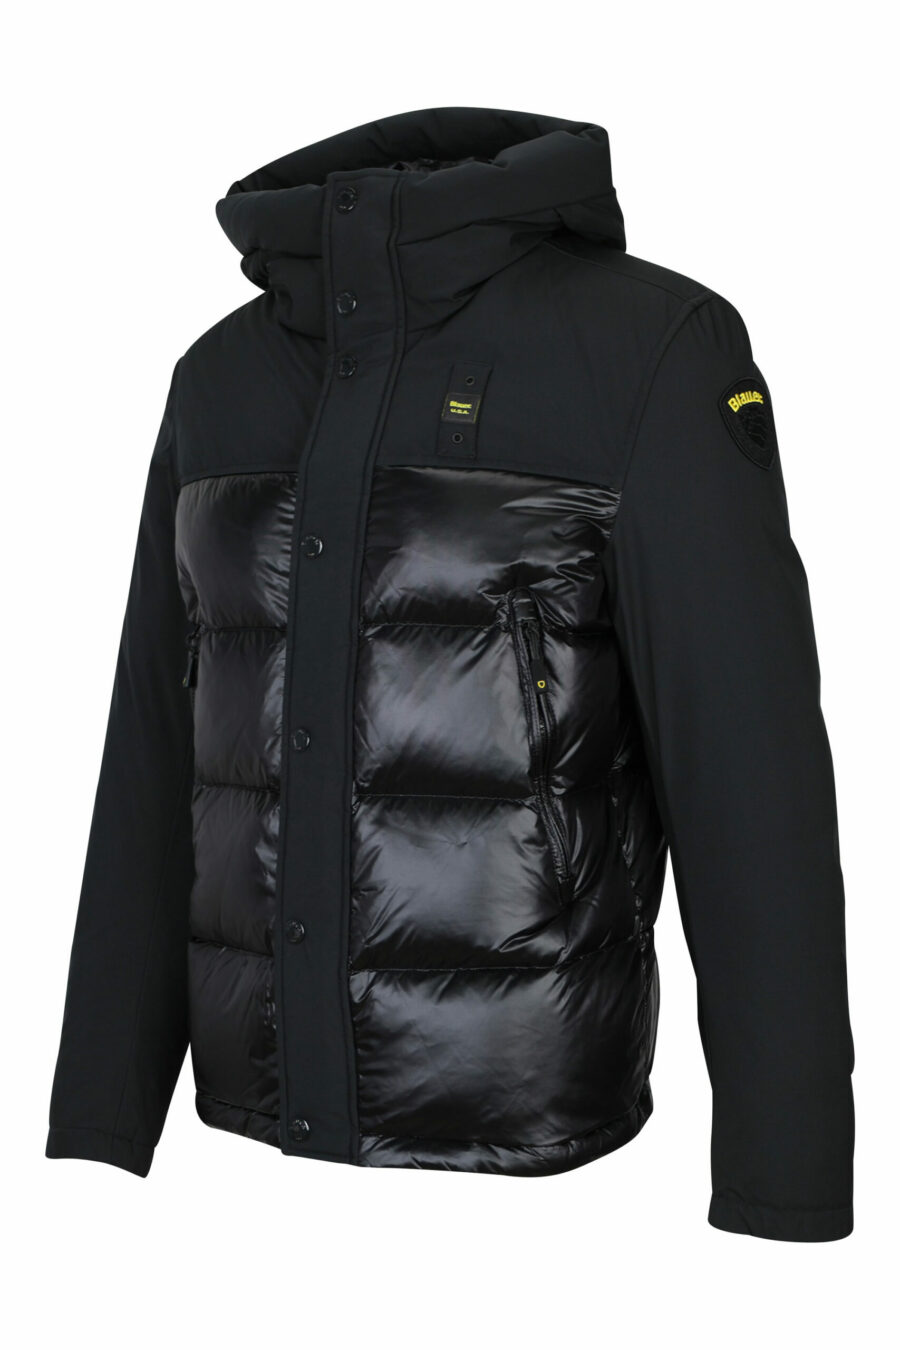 Black mix hooded jacket with logo patch - 8058610657222 1 scaled